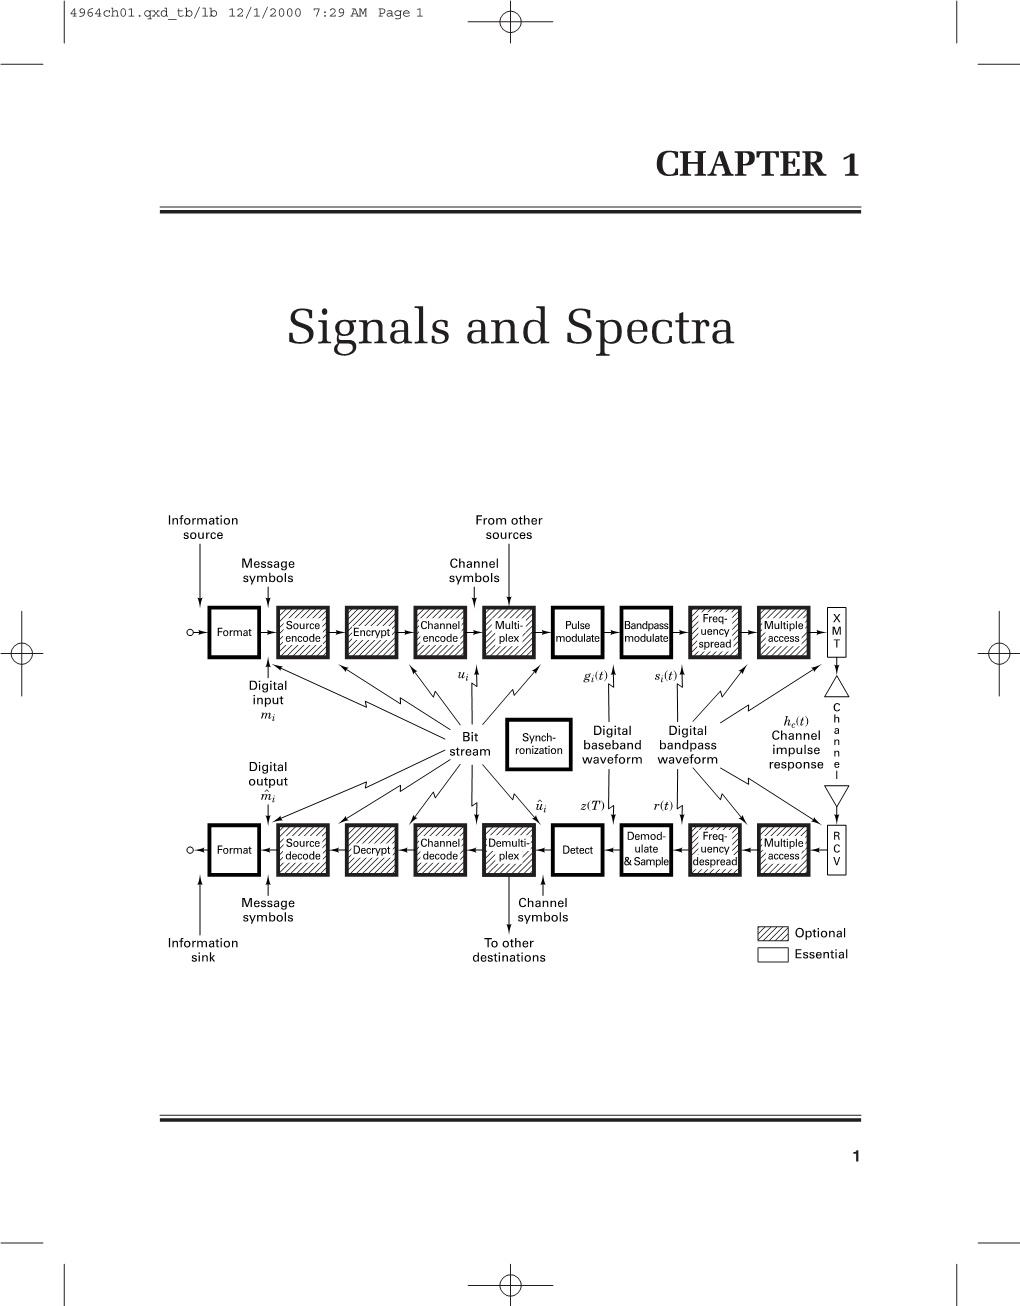 Signals and Spectra